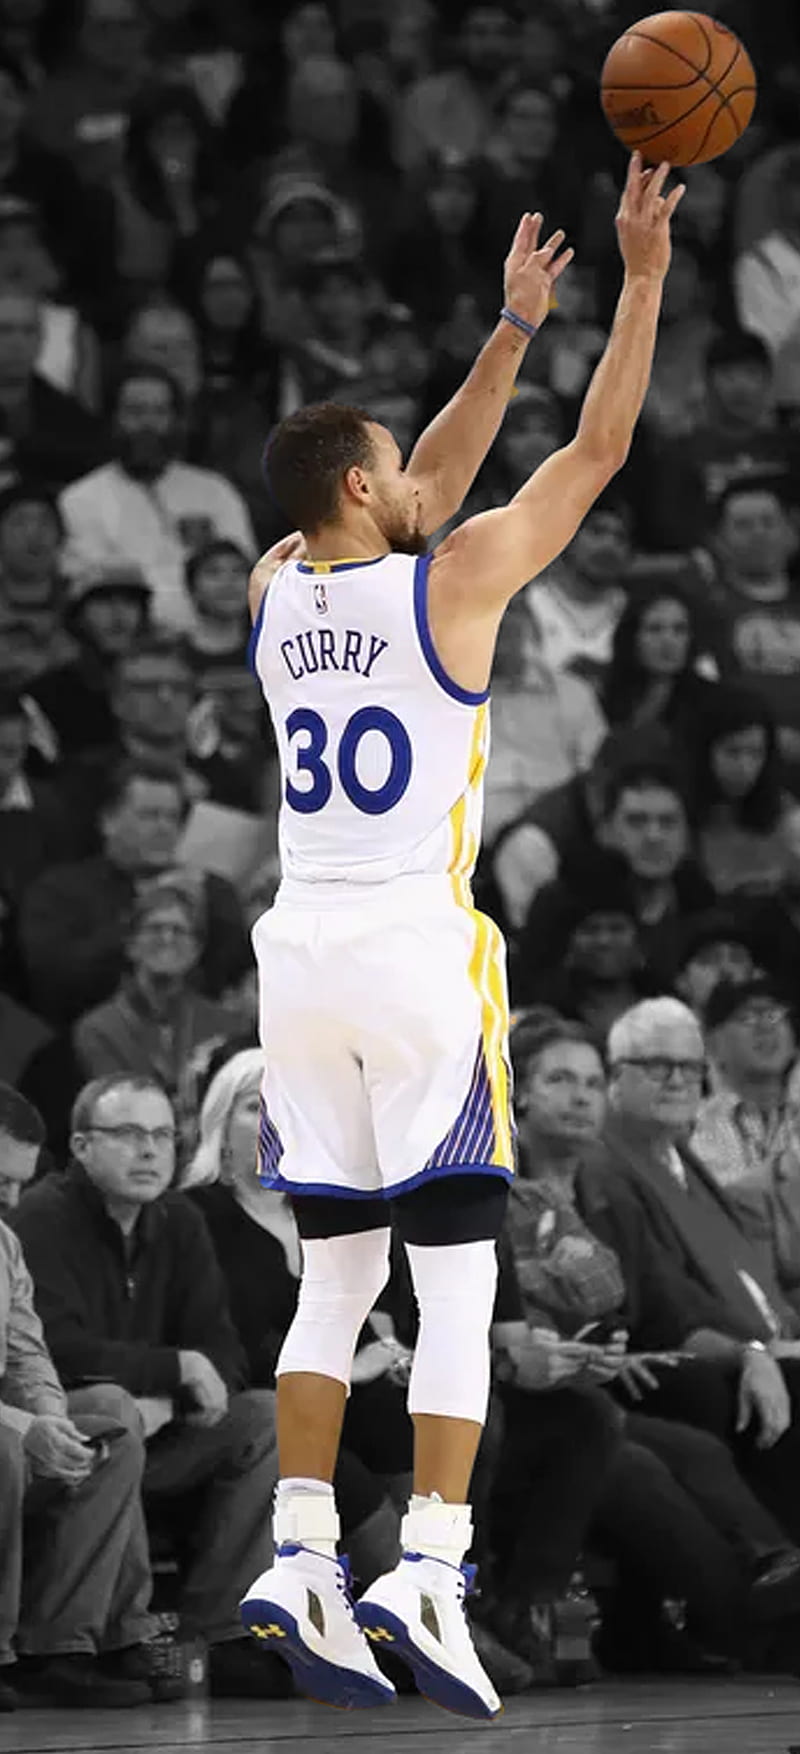 Stephen Curry Iphone 7 Wallpaper Hd  Live Wallpaper HD  Stephen curry  wallpaper Curry wallpaper Stephen curry